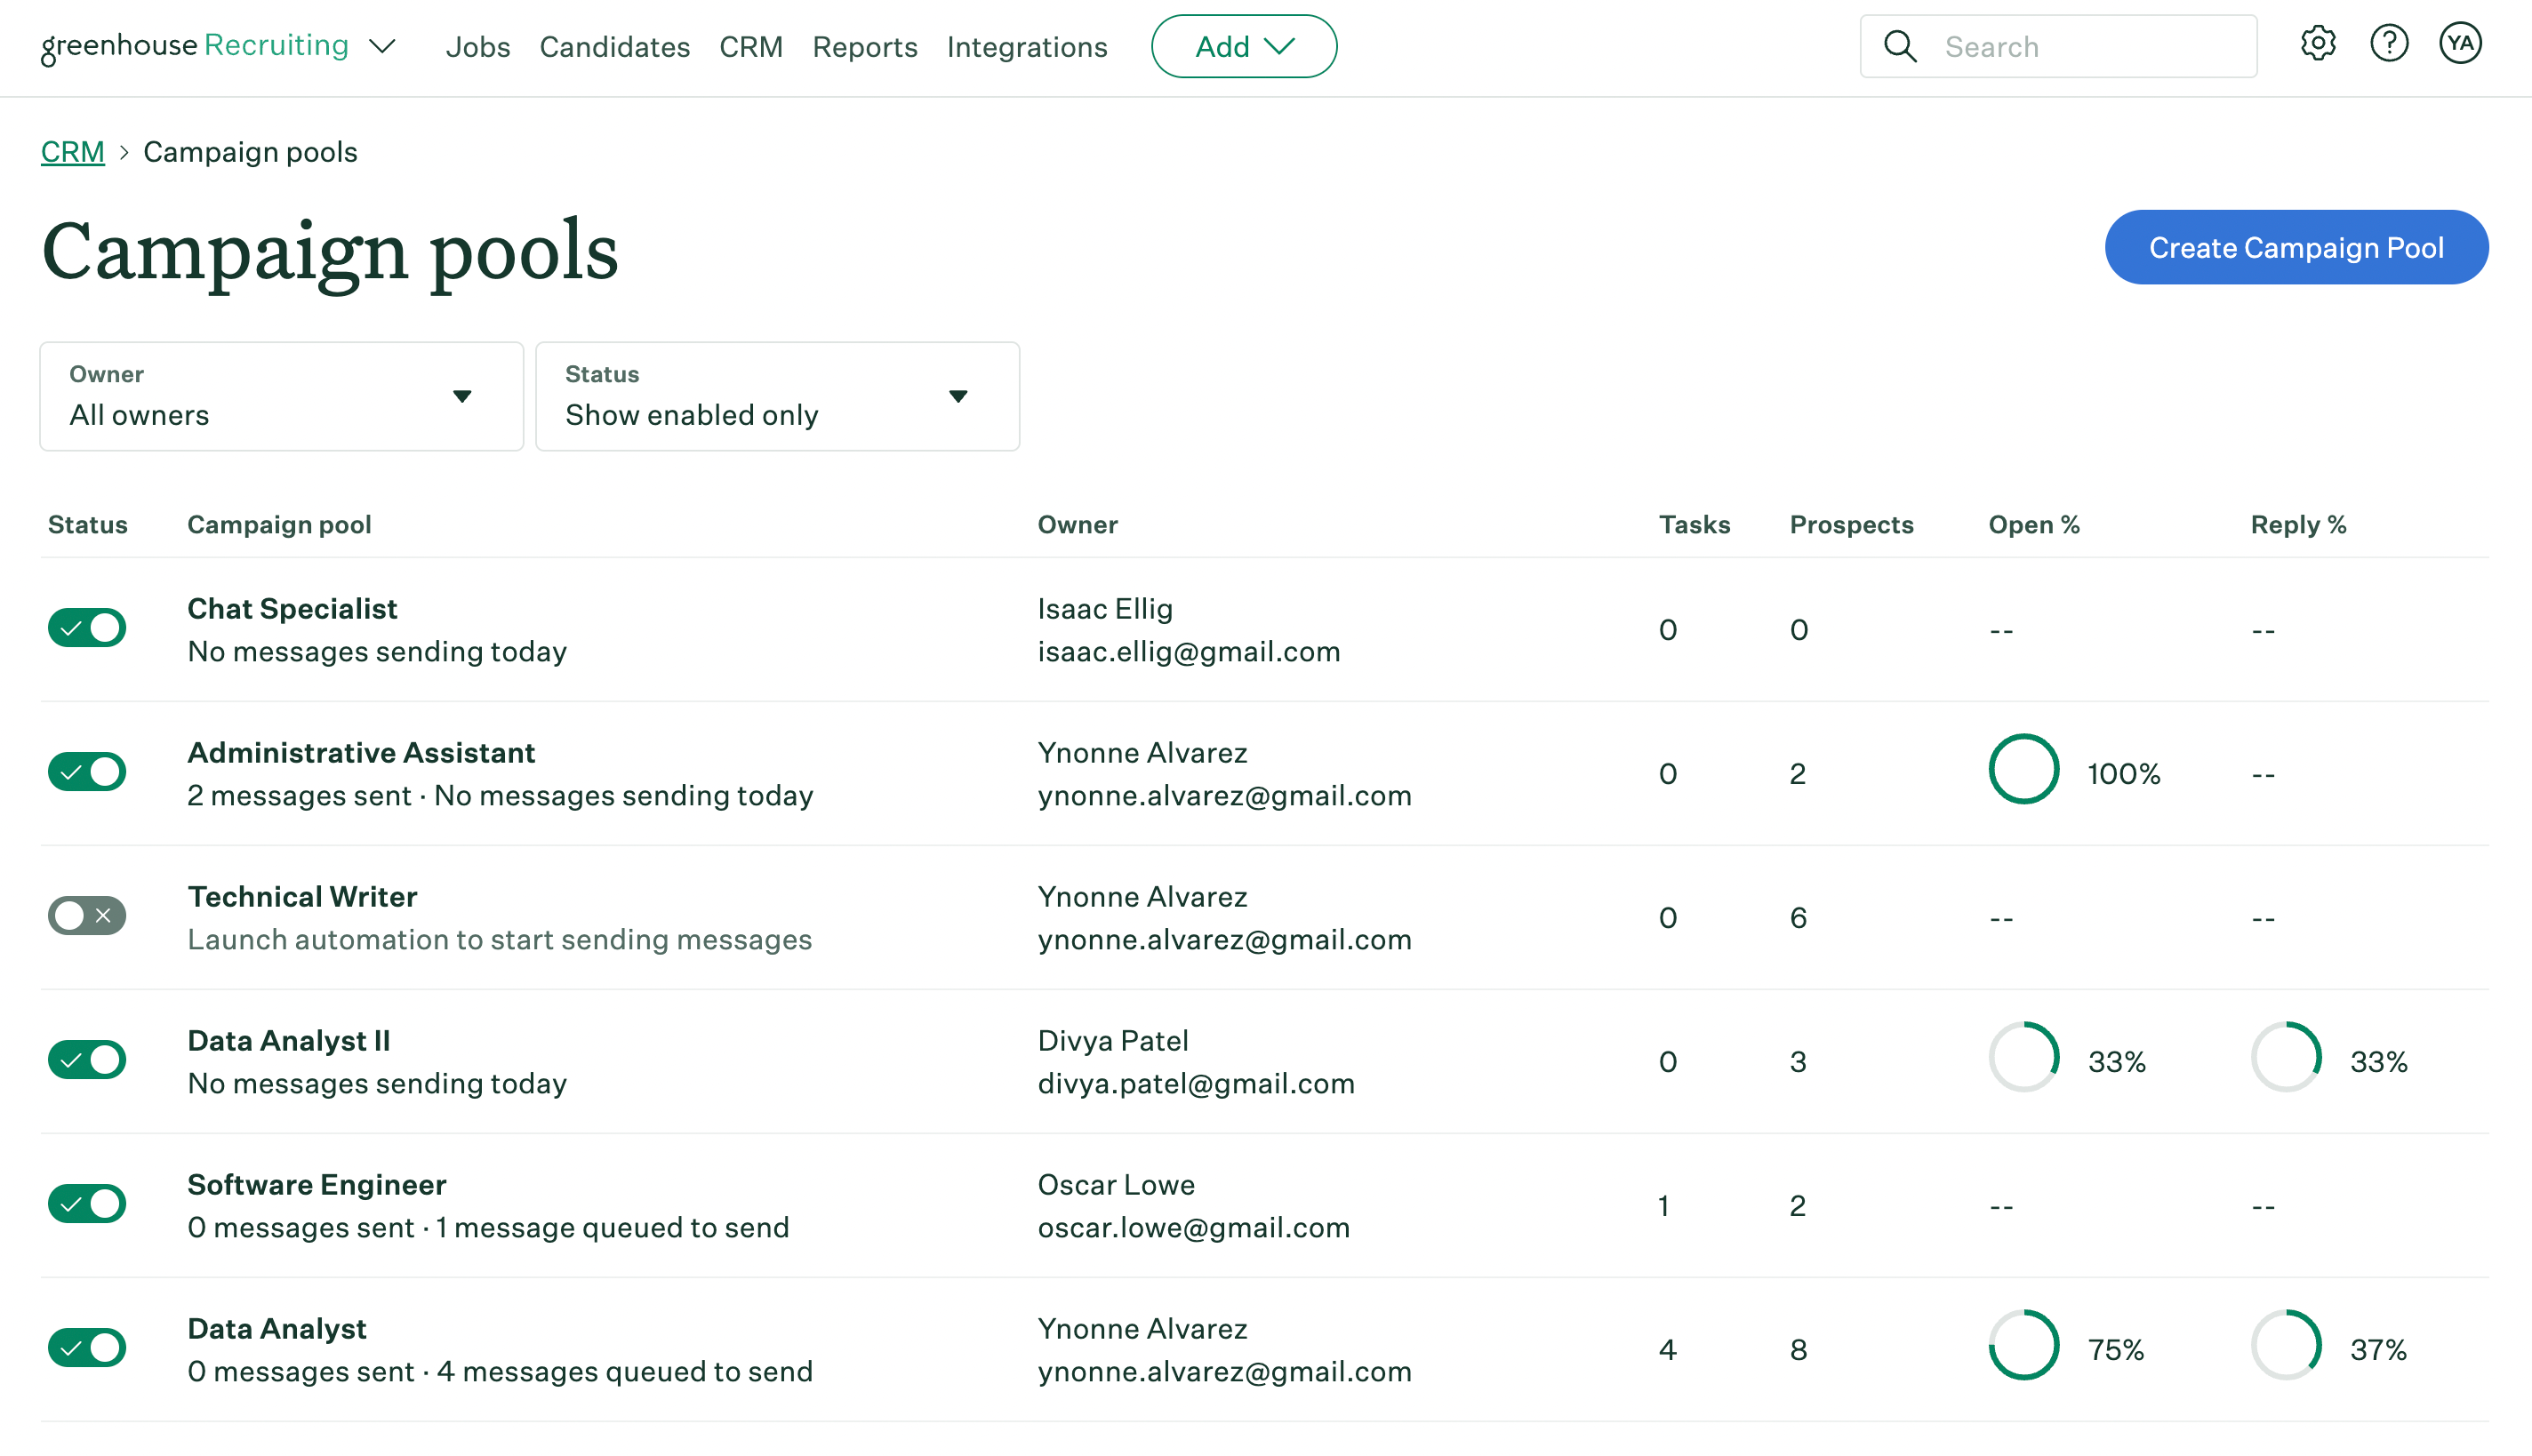 Campaign pools page in Greenhouse Recruiting with full dashboard view